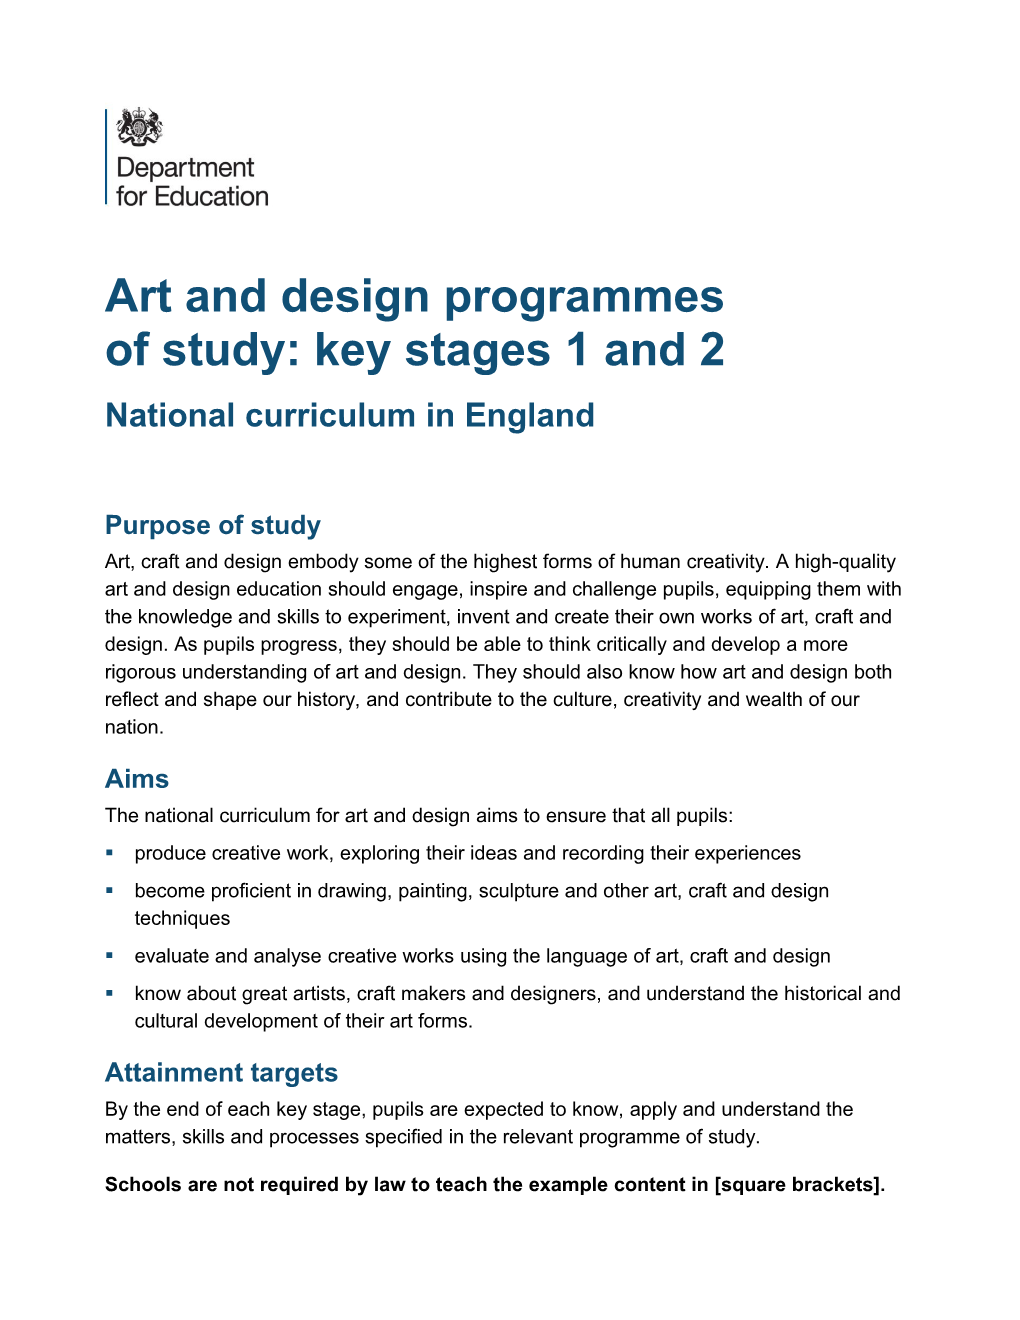 National Curriculum - Art and Design Key Stages 1 to 2